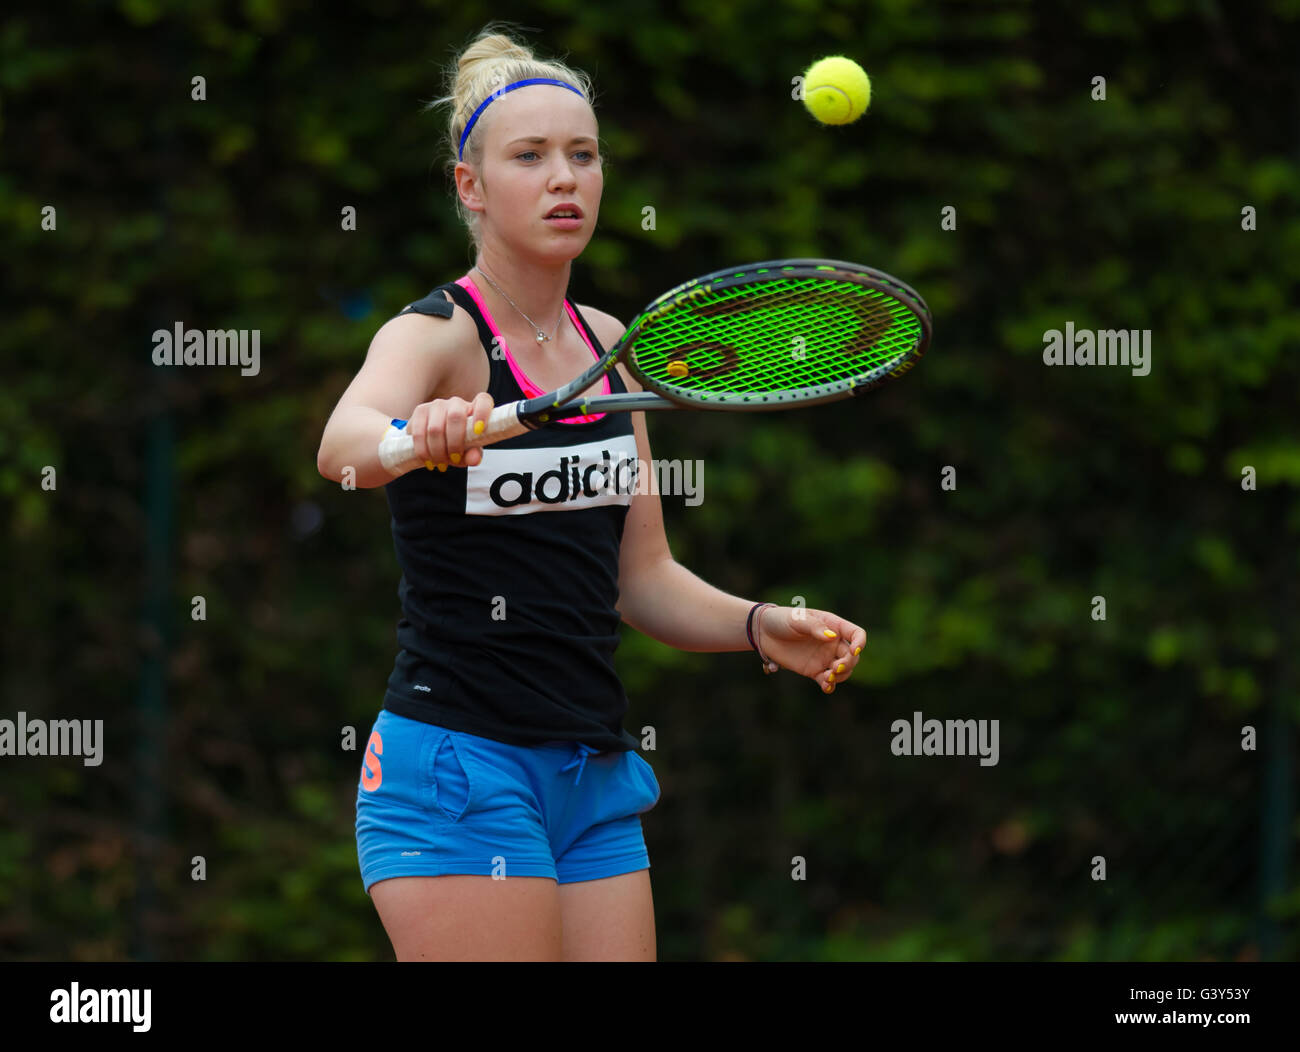 Braunschweig, Germany. 16 June, 2016. Katharina Hobgarski in action at the  2016 Braunschweig Womens Open ITF Pro Circuit $25,000 tennis tournament.  Credit: Jimmie48 Photography/Alamy Live News Stock Photo - Alamy